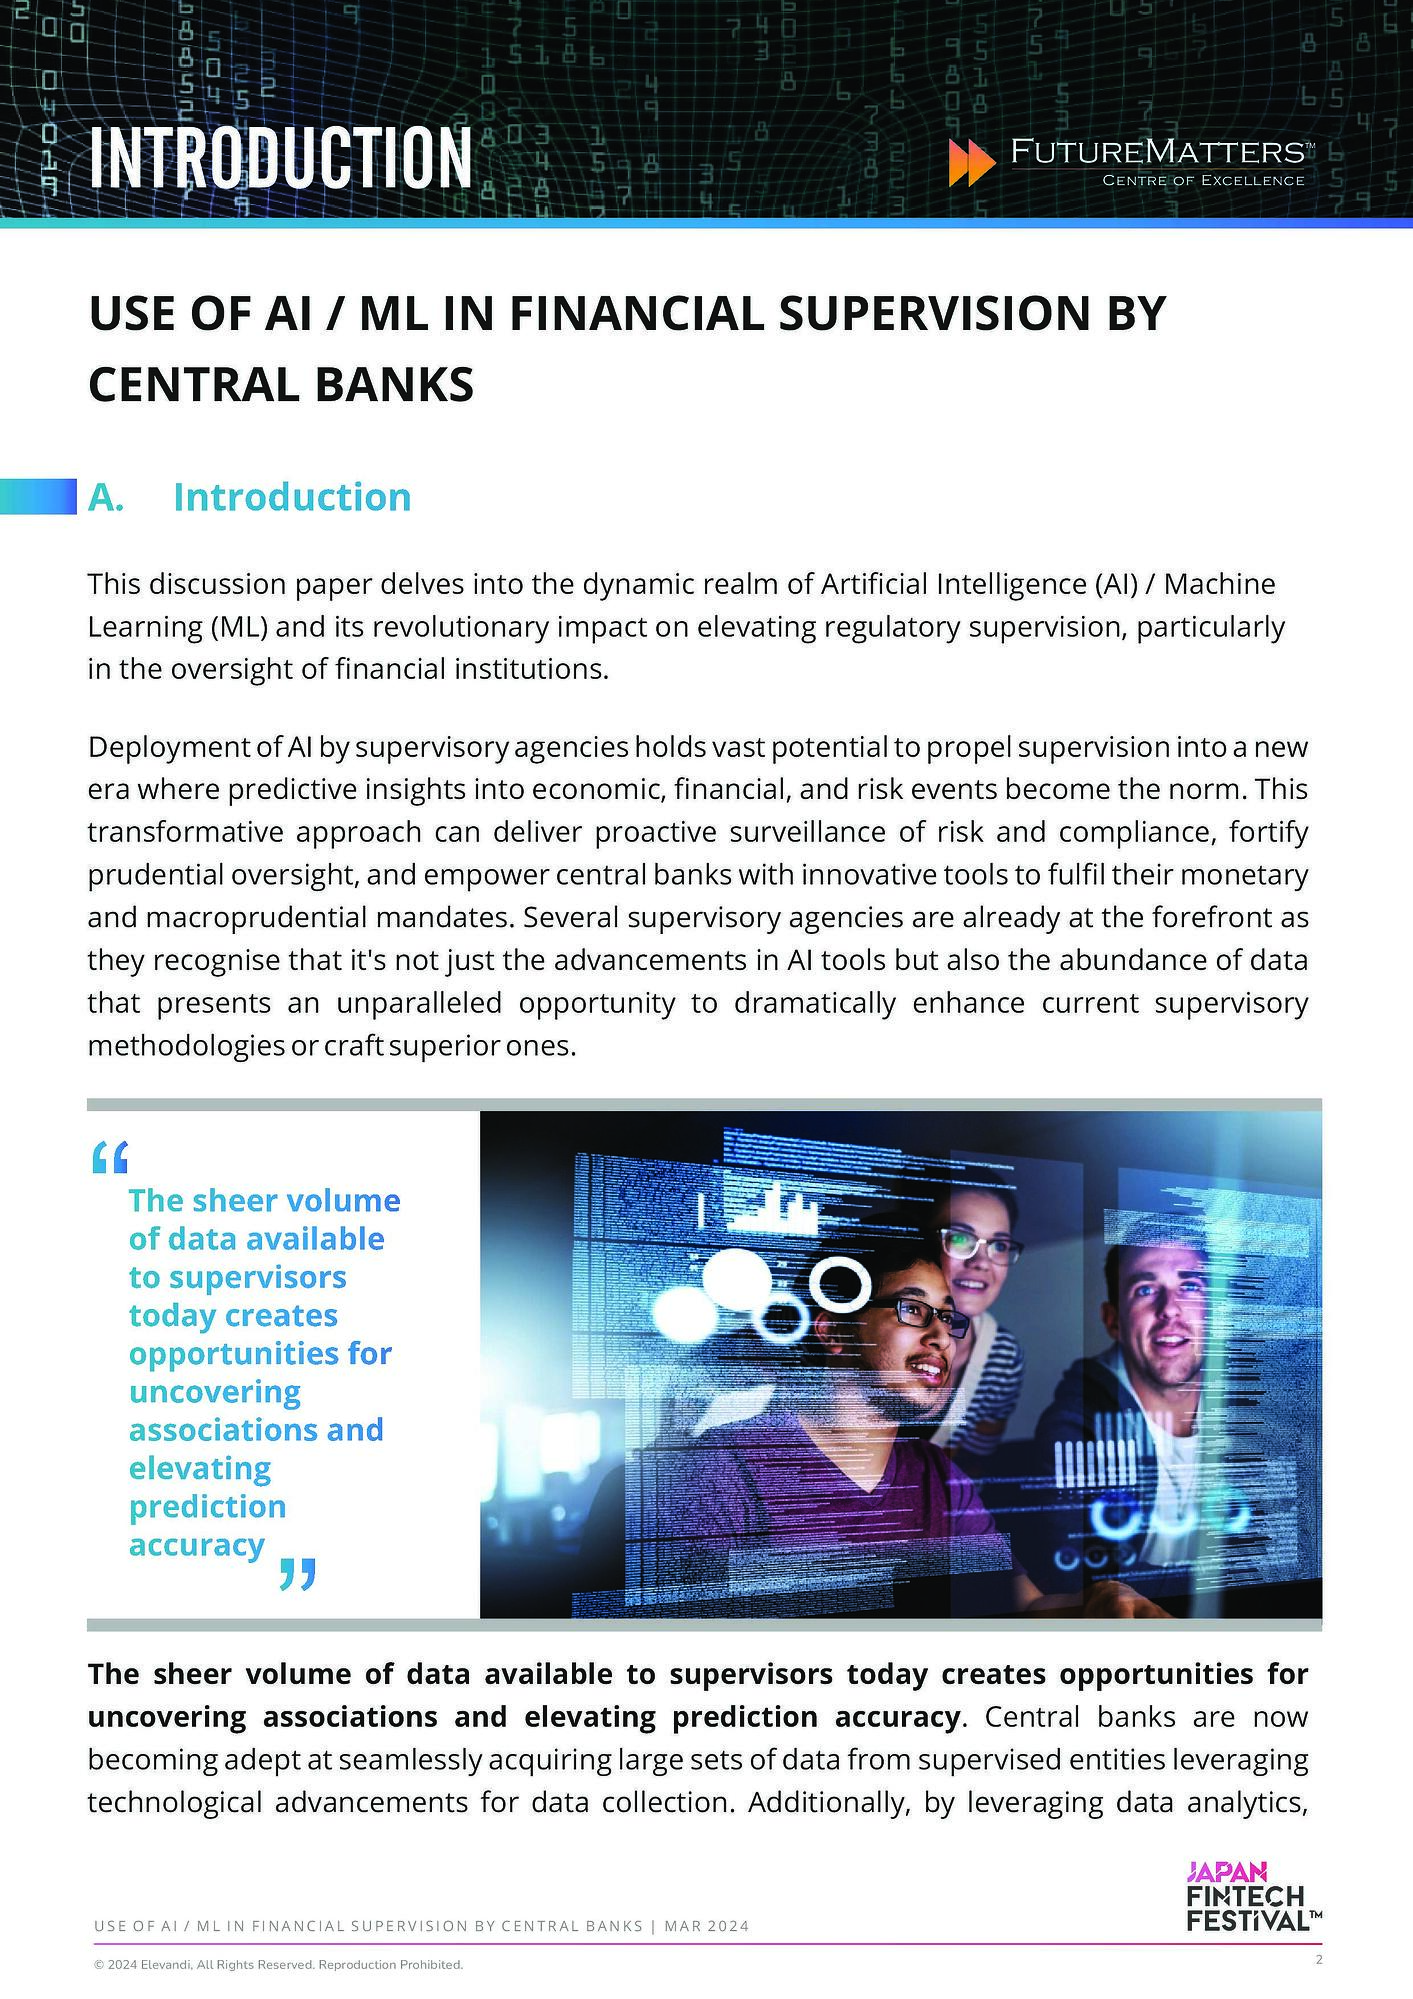 Use Of AI/ML In Financial Supervision By Central Banks-2